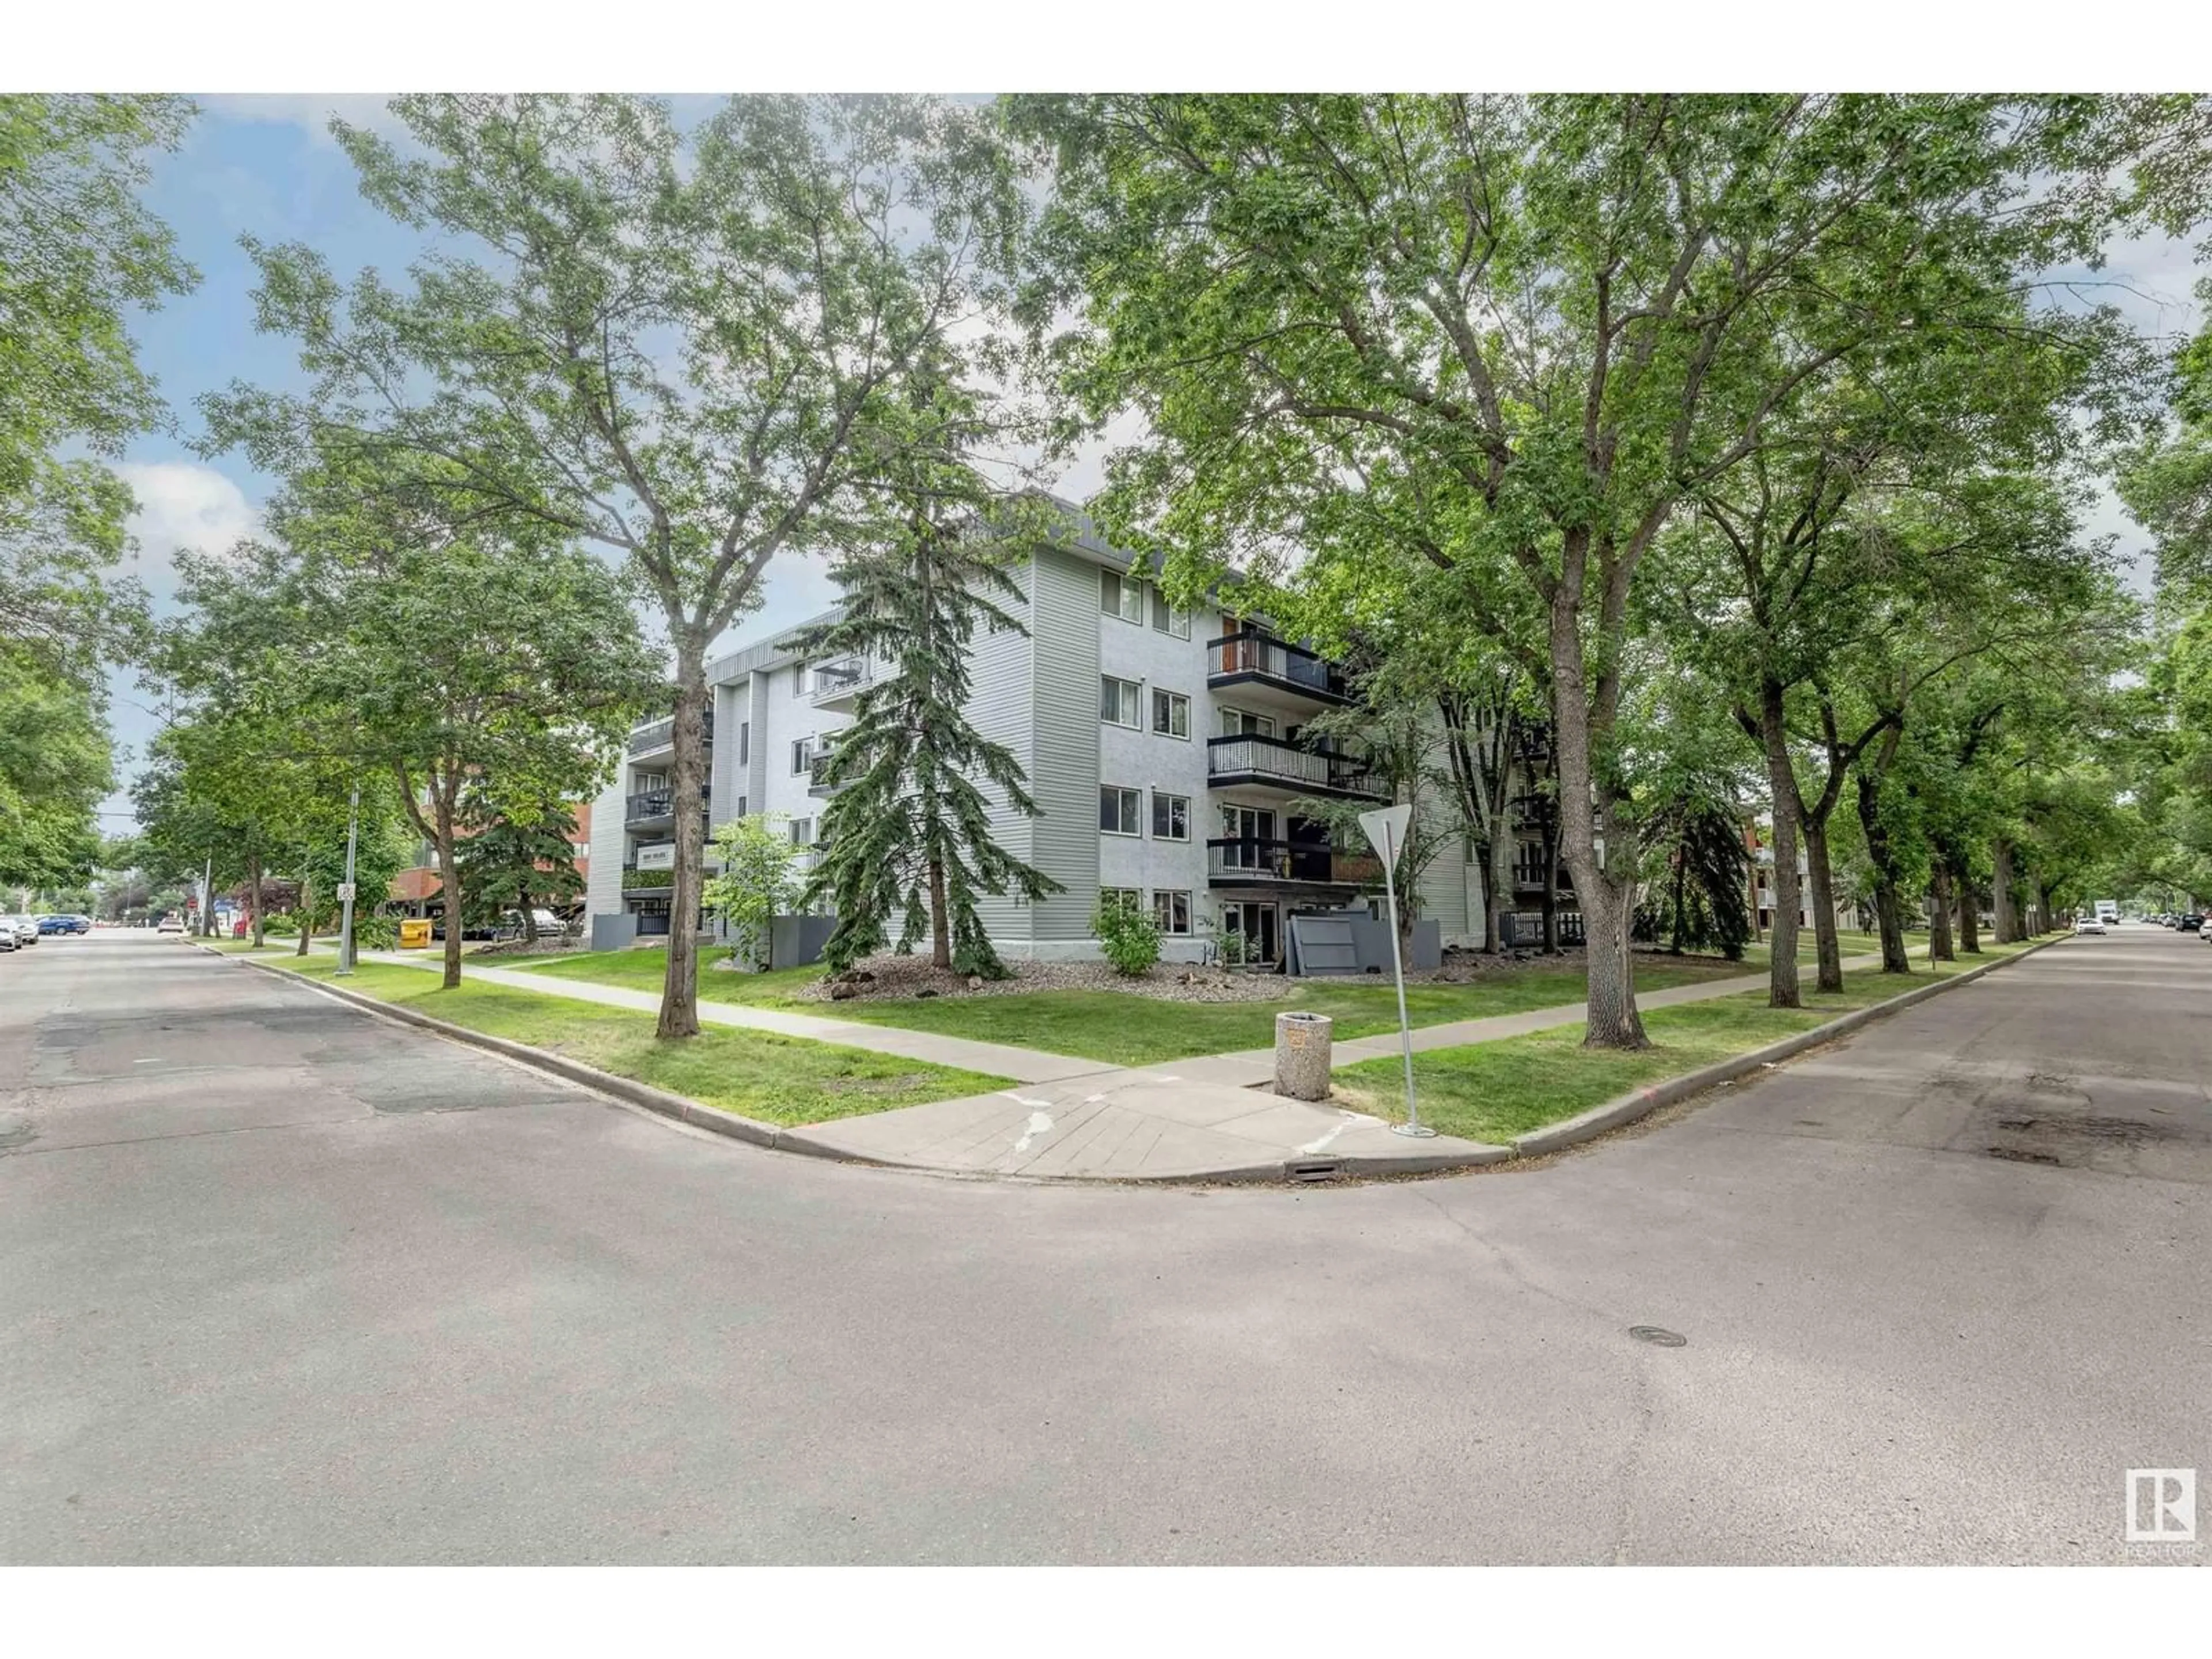 A pic from exterior of the house or condo for #104 11217 103 AV NW, Edmonton Alberta T5K2V9